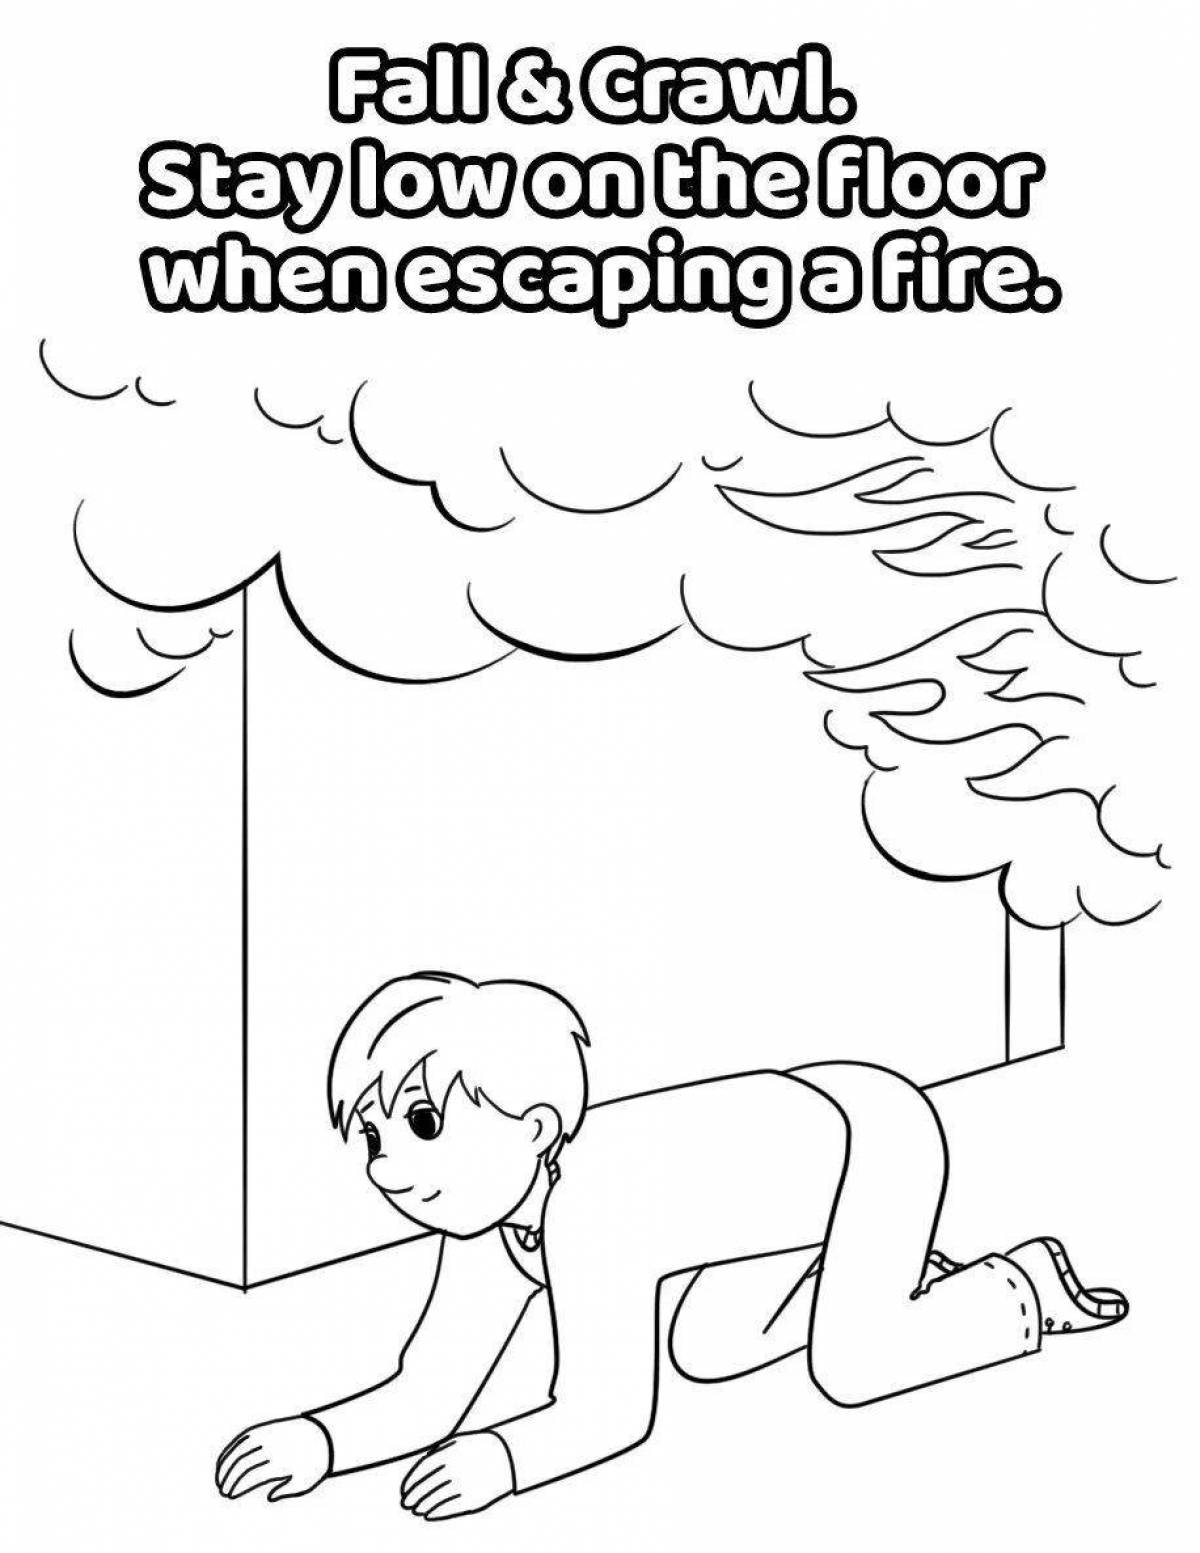 Fire safety rules for children #10